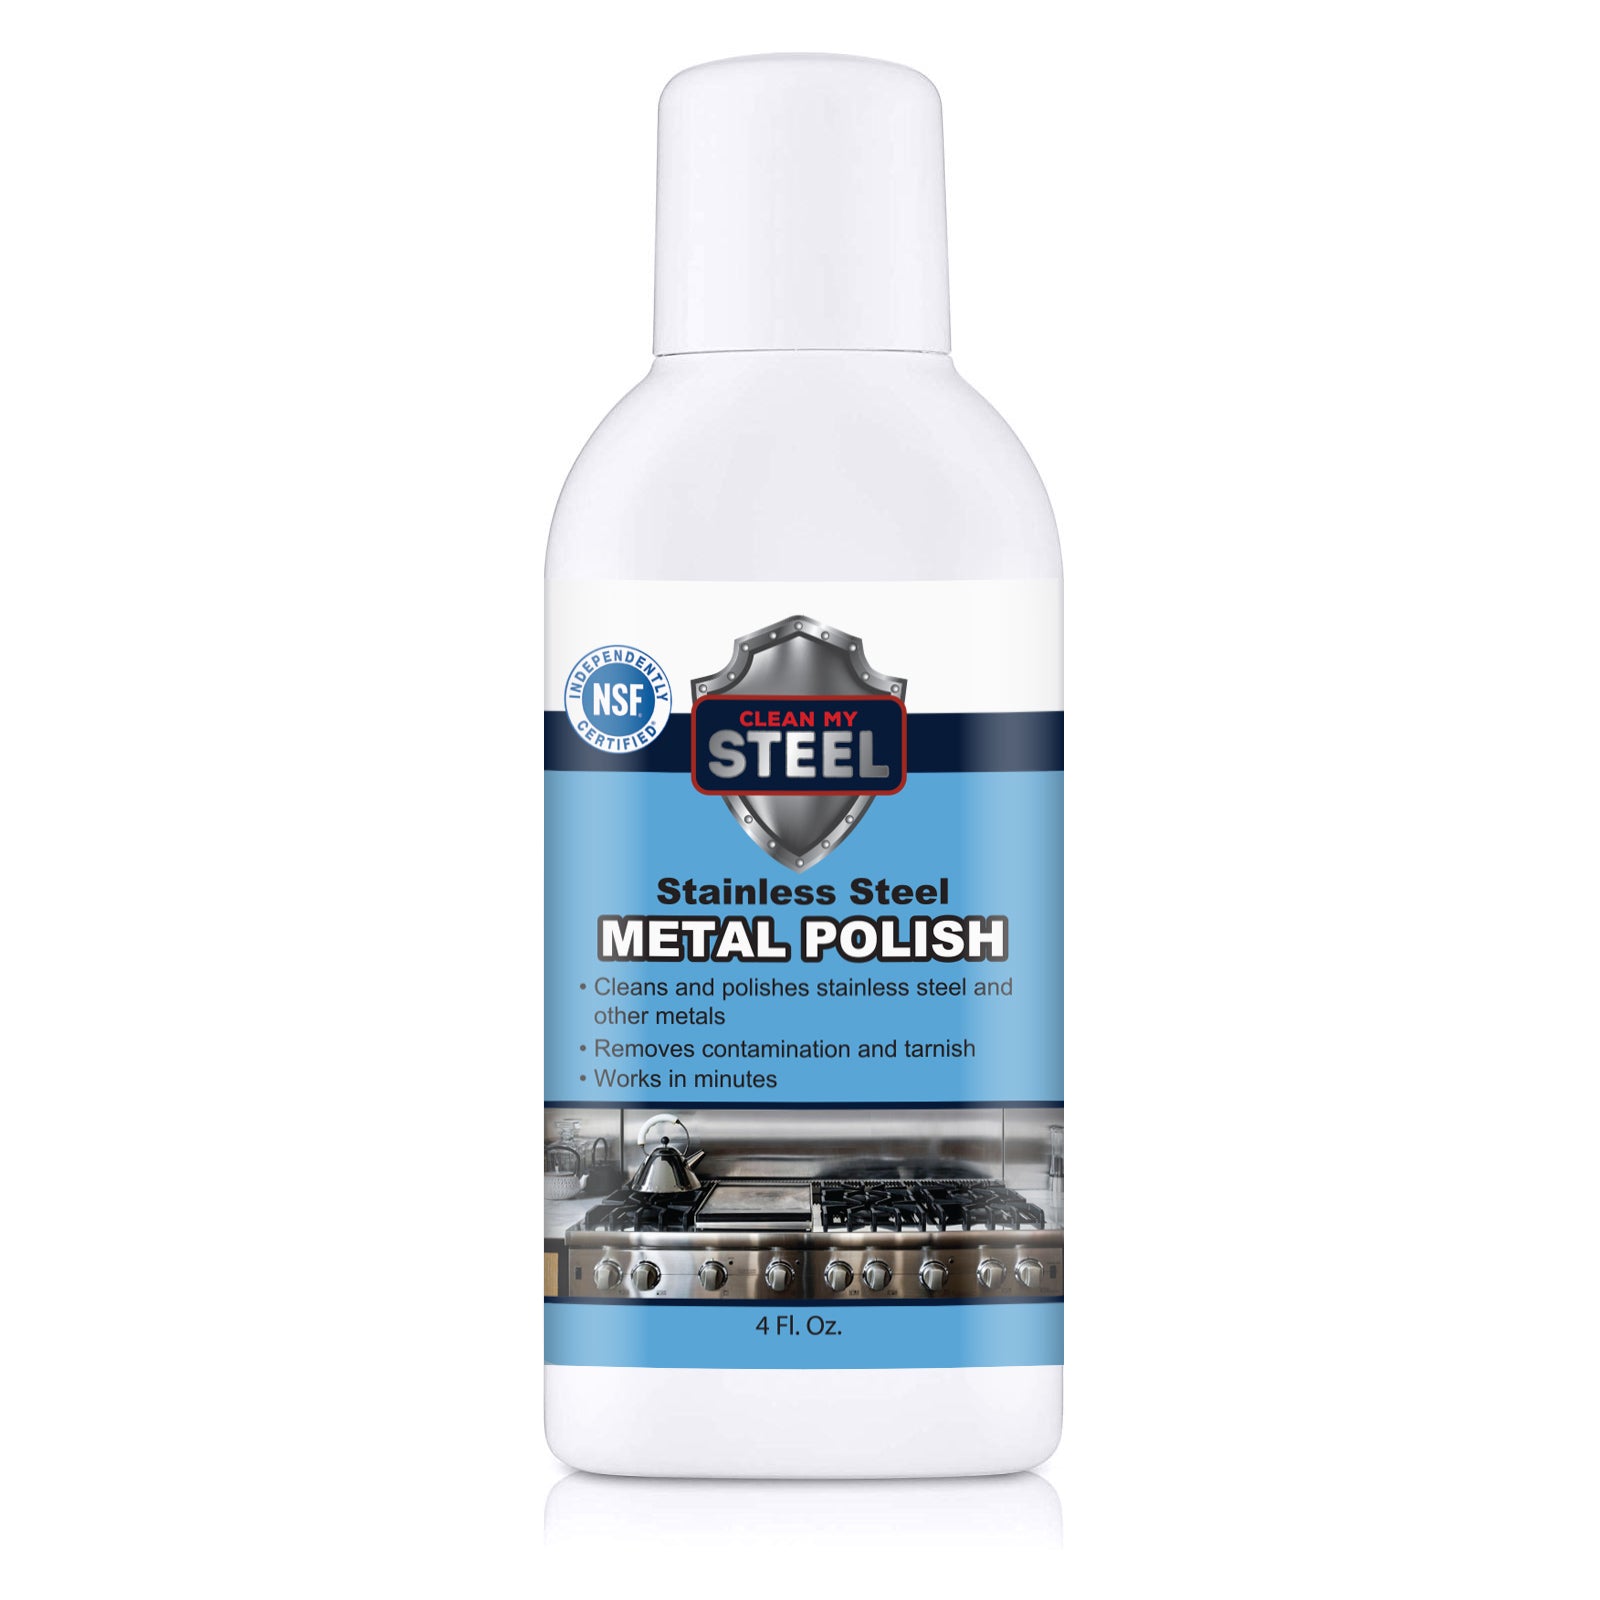 Metal Cleaner and Tarnish Remover - 14 oz.